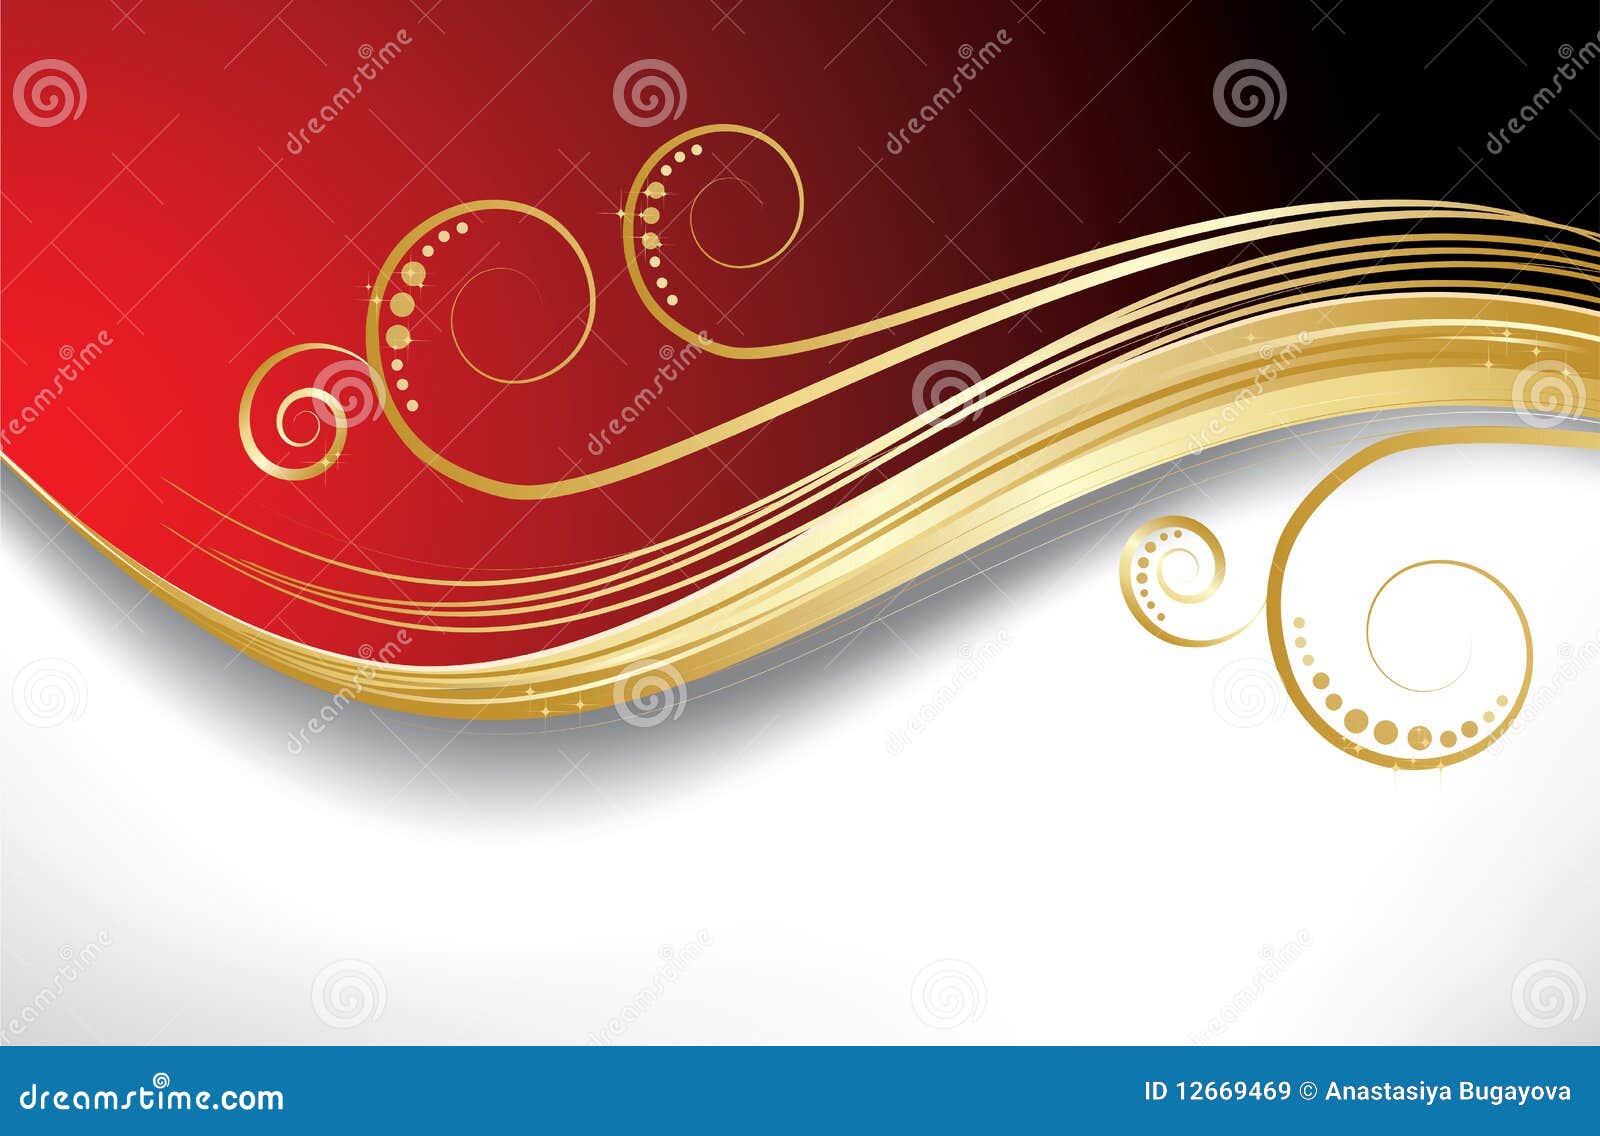 Red waves background stock vector. Illustration of computer - 12669469